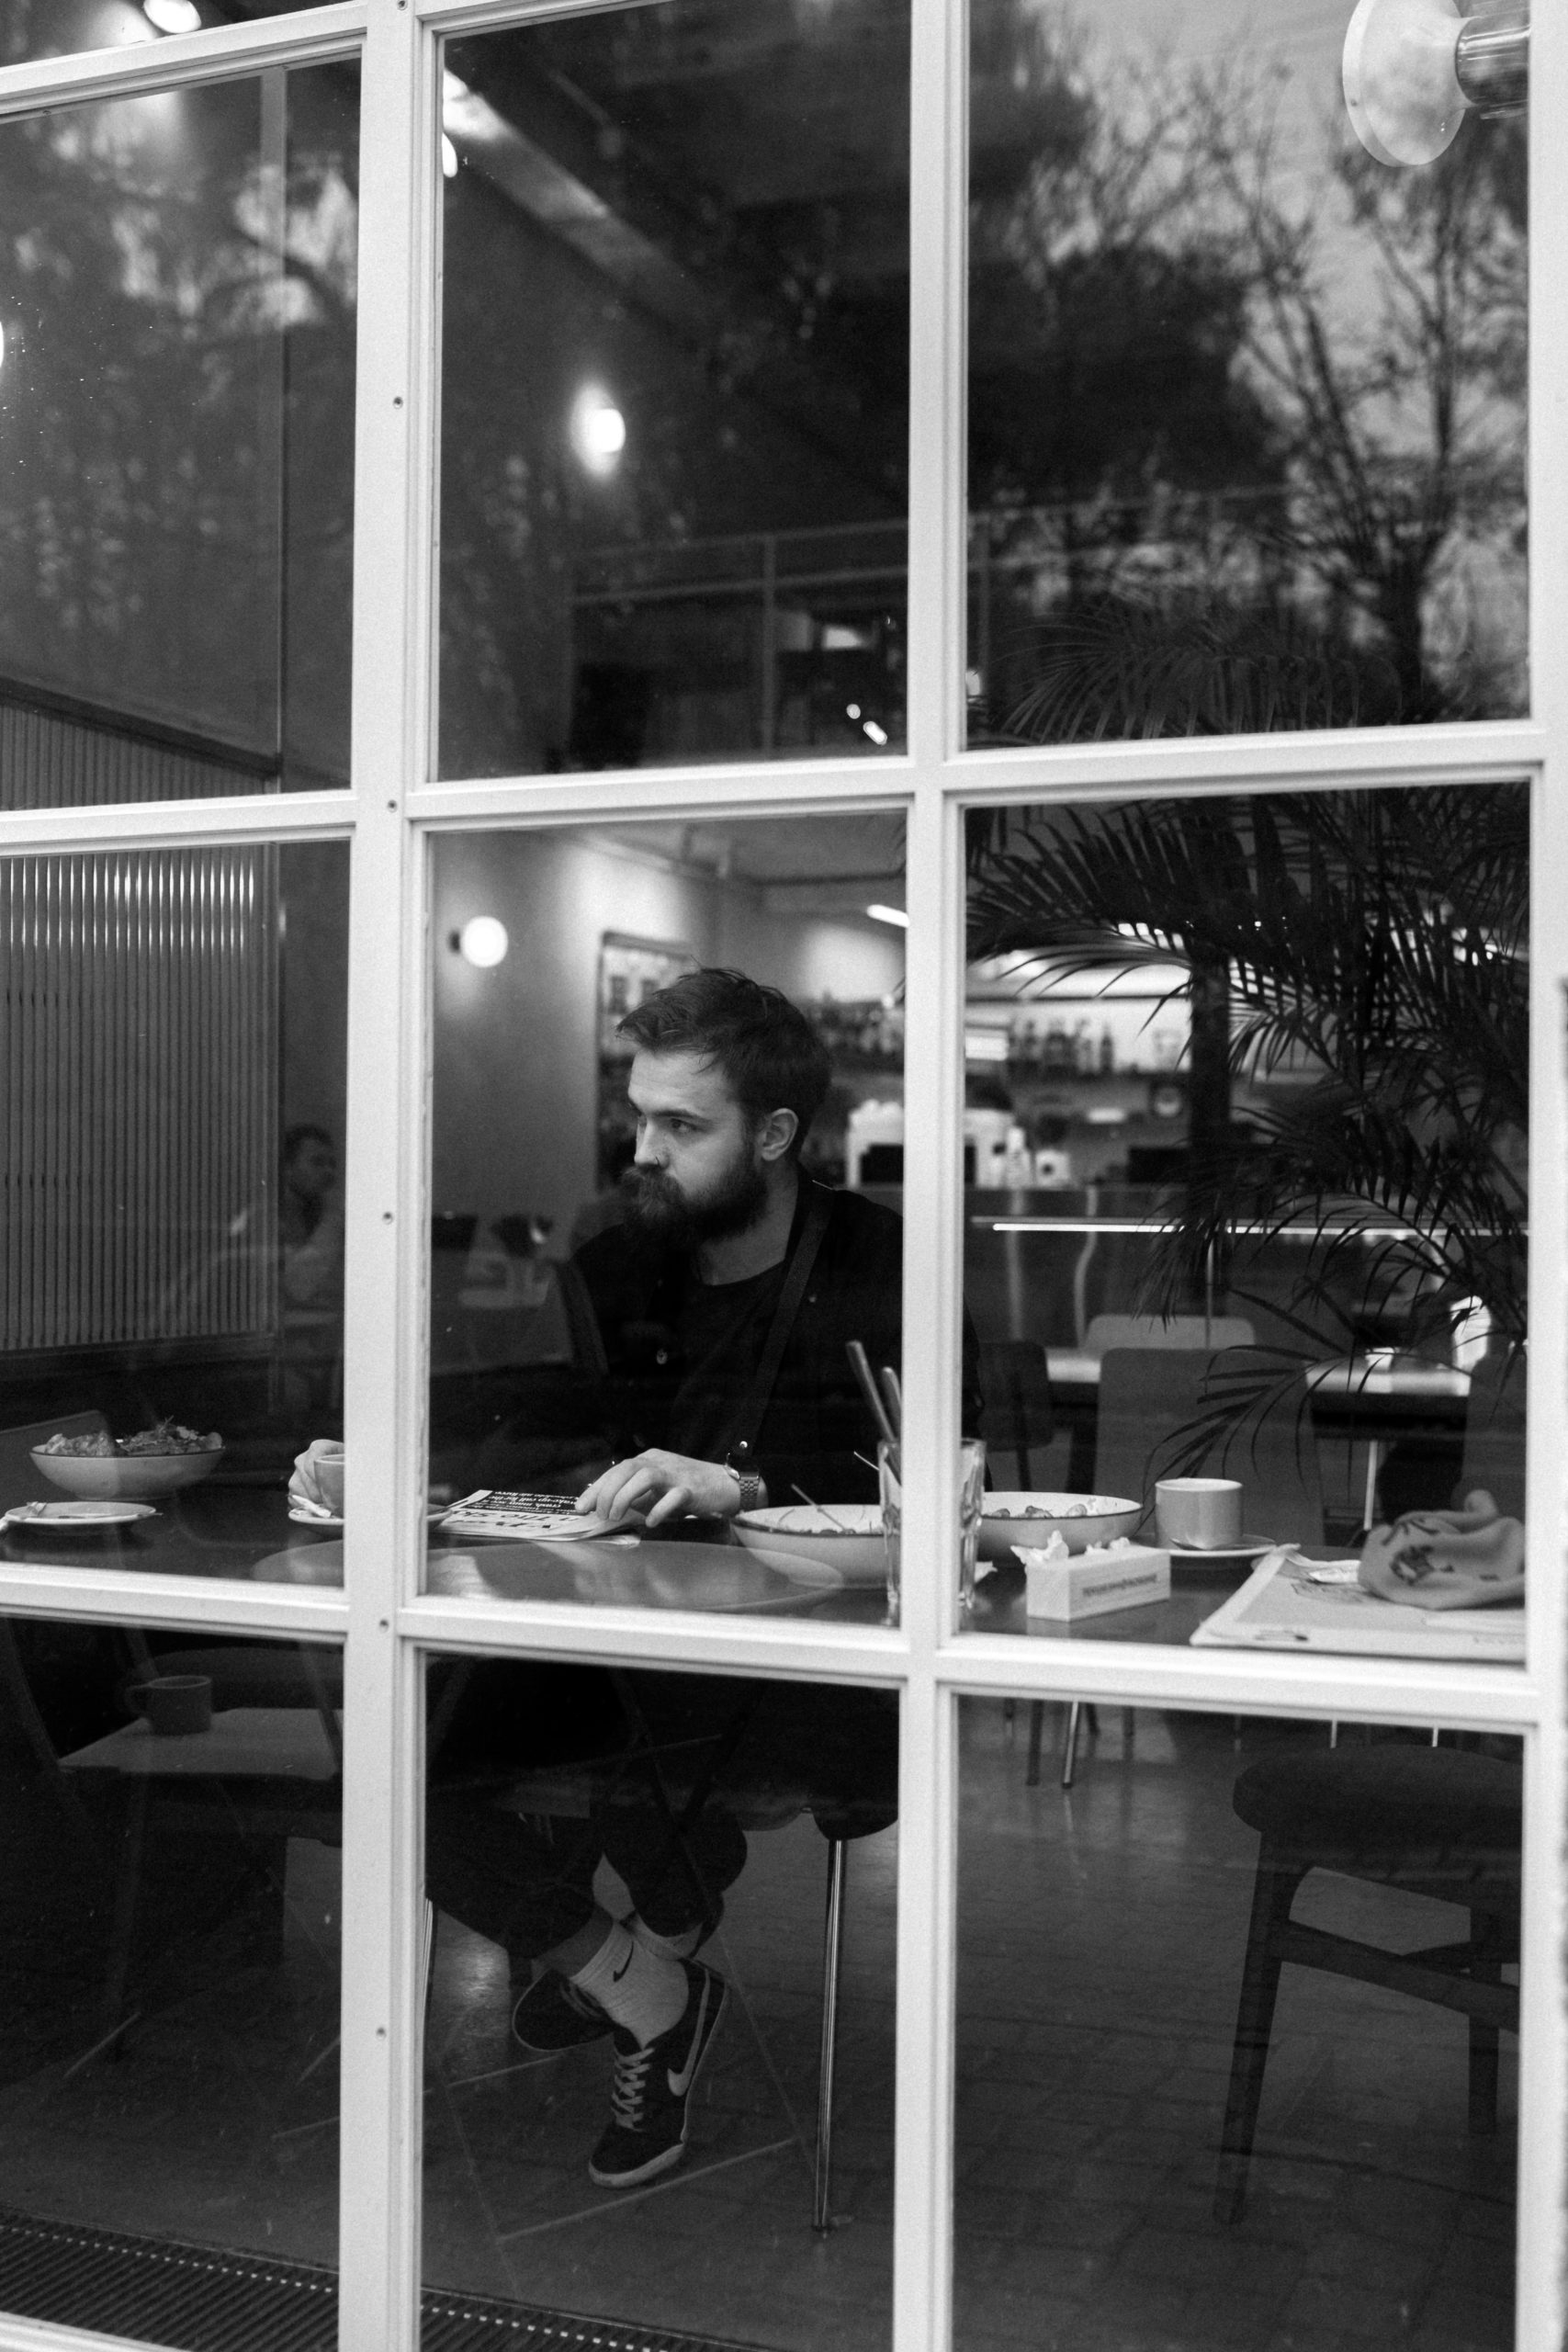 Man sitting alone in a restaurant window in black and white